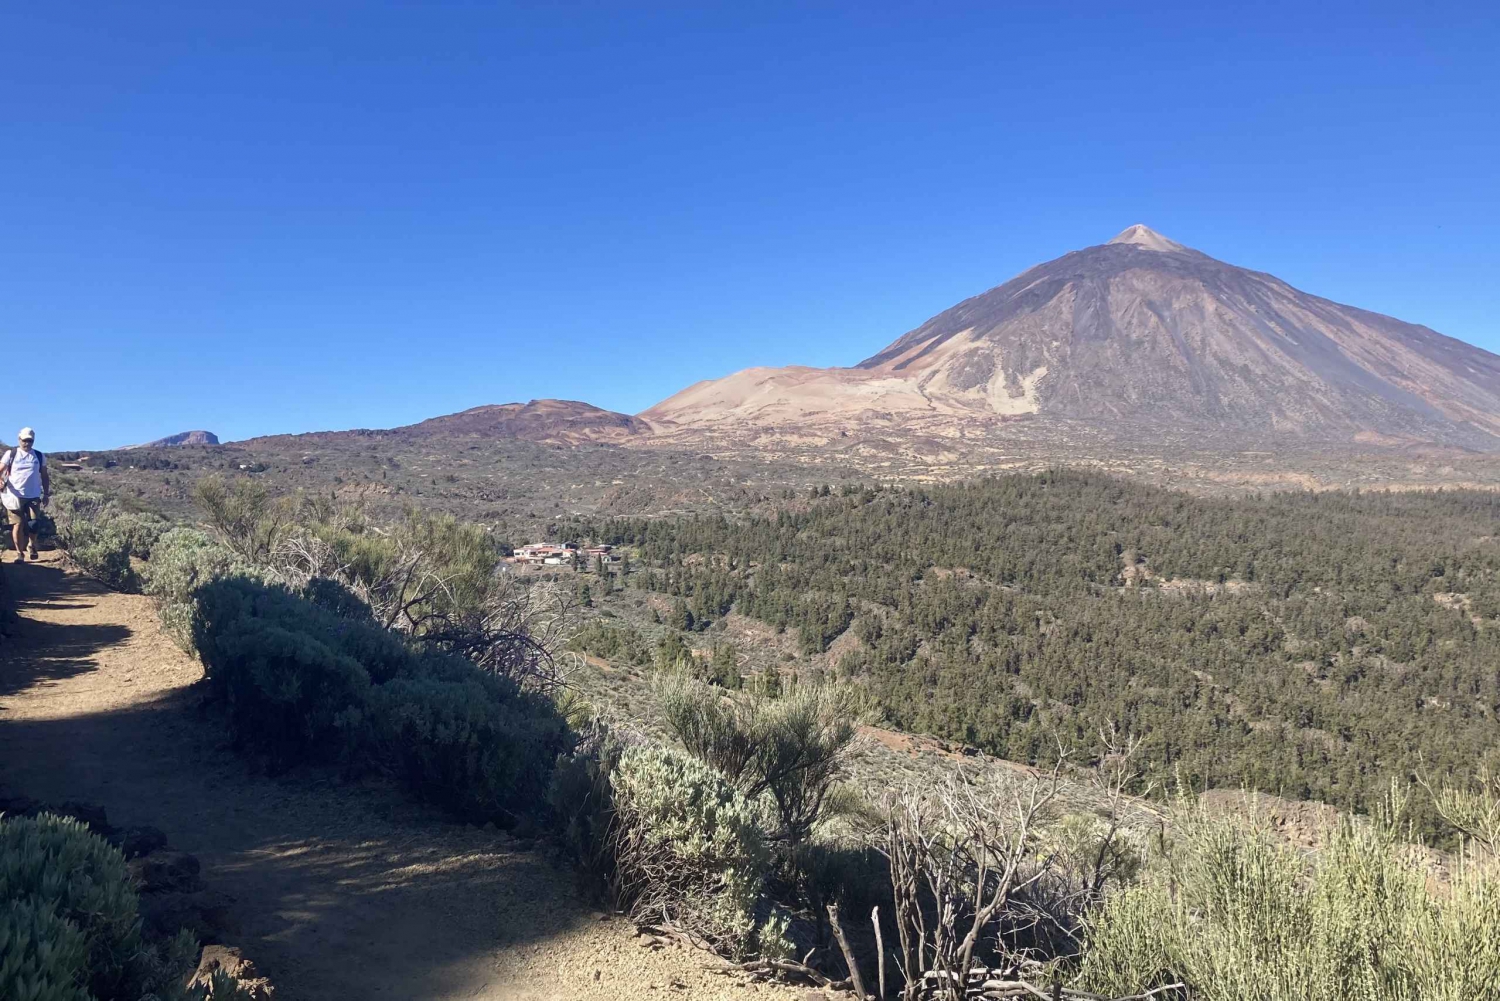 Tenerife: Private Guided Mindful Hike Teide with transport